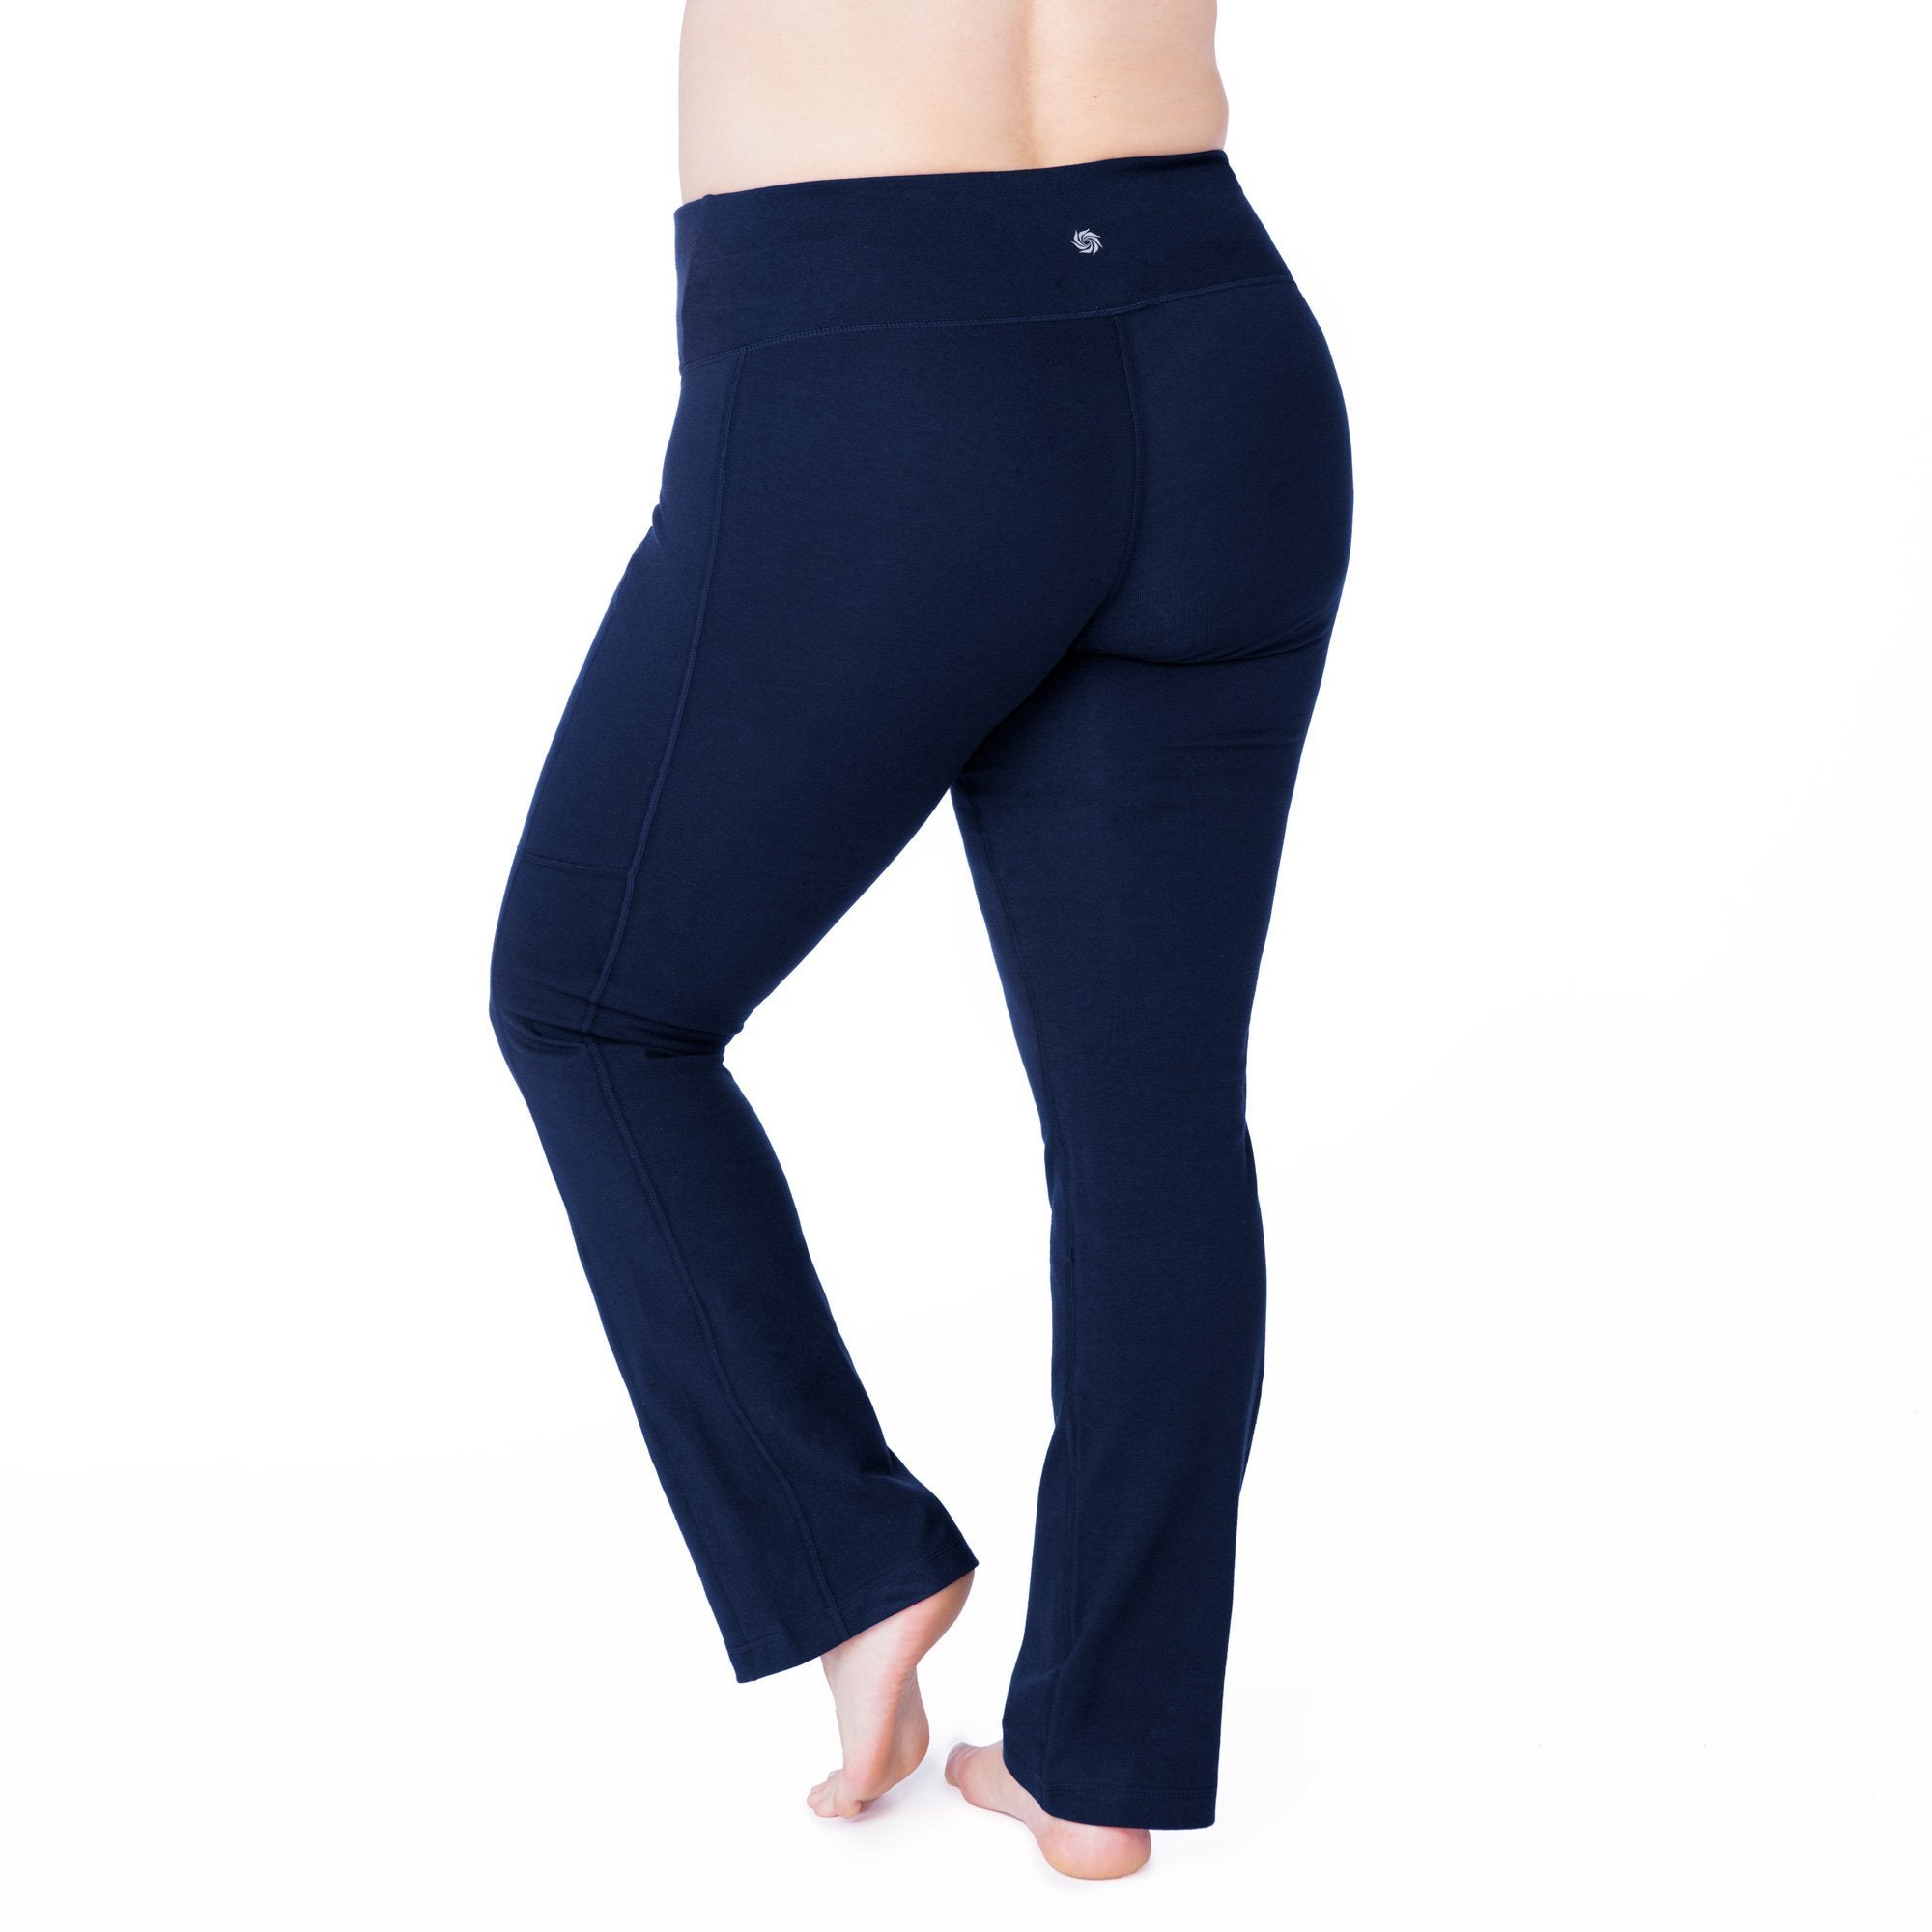 Women's Black Flared Sports Leggings - Stay Comfortable and